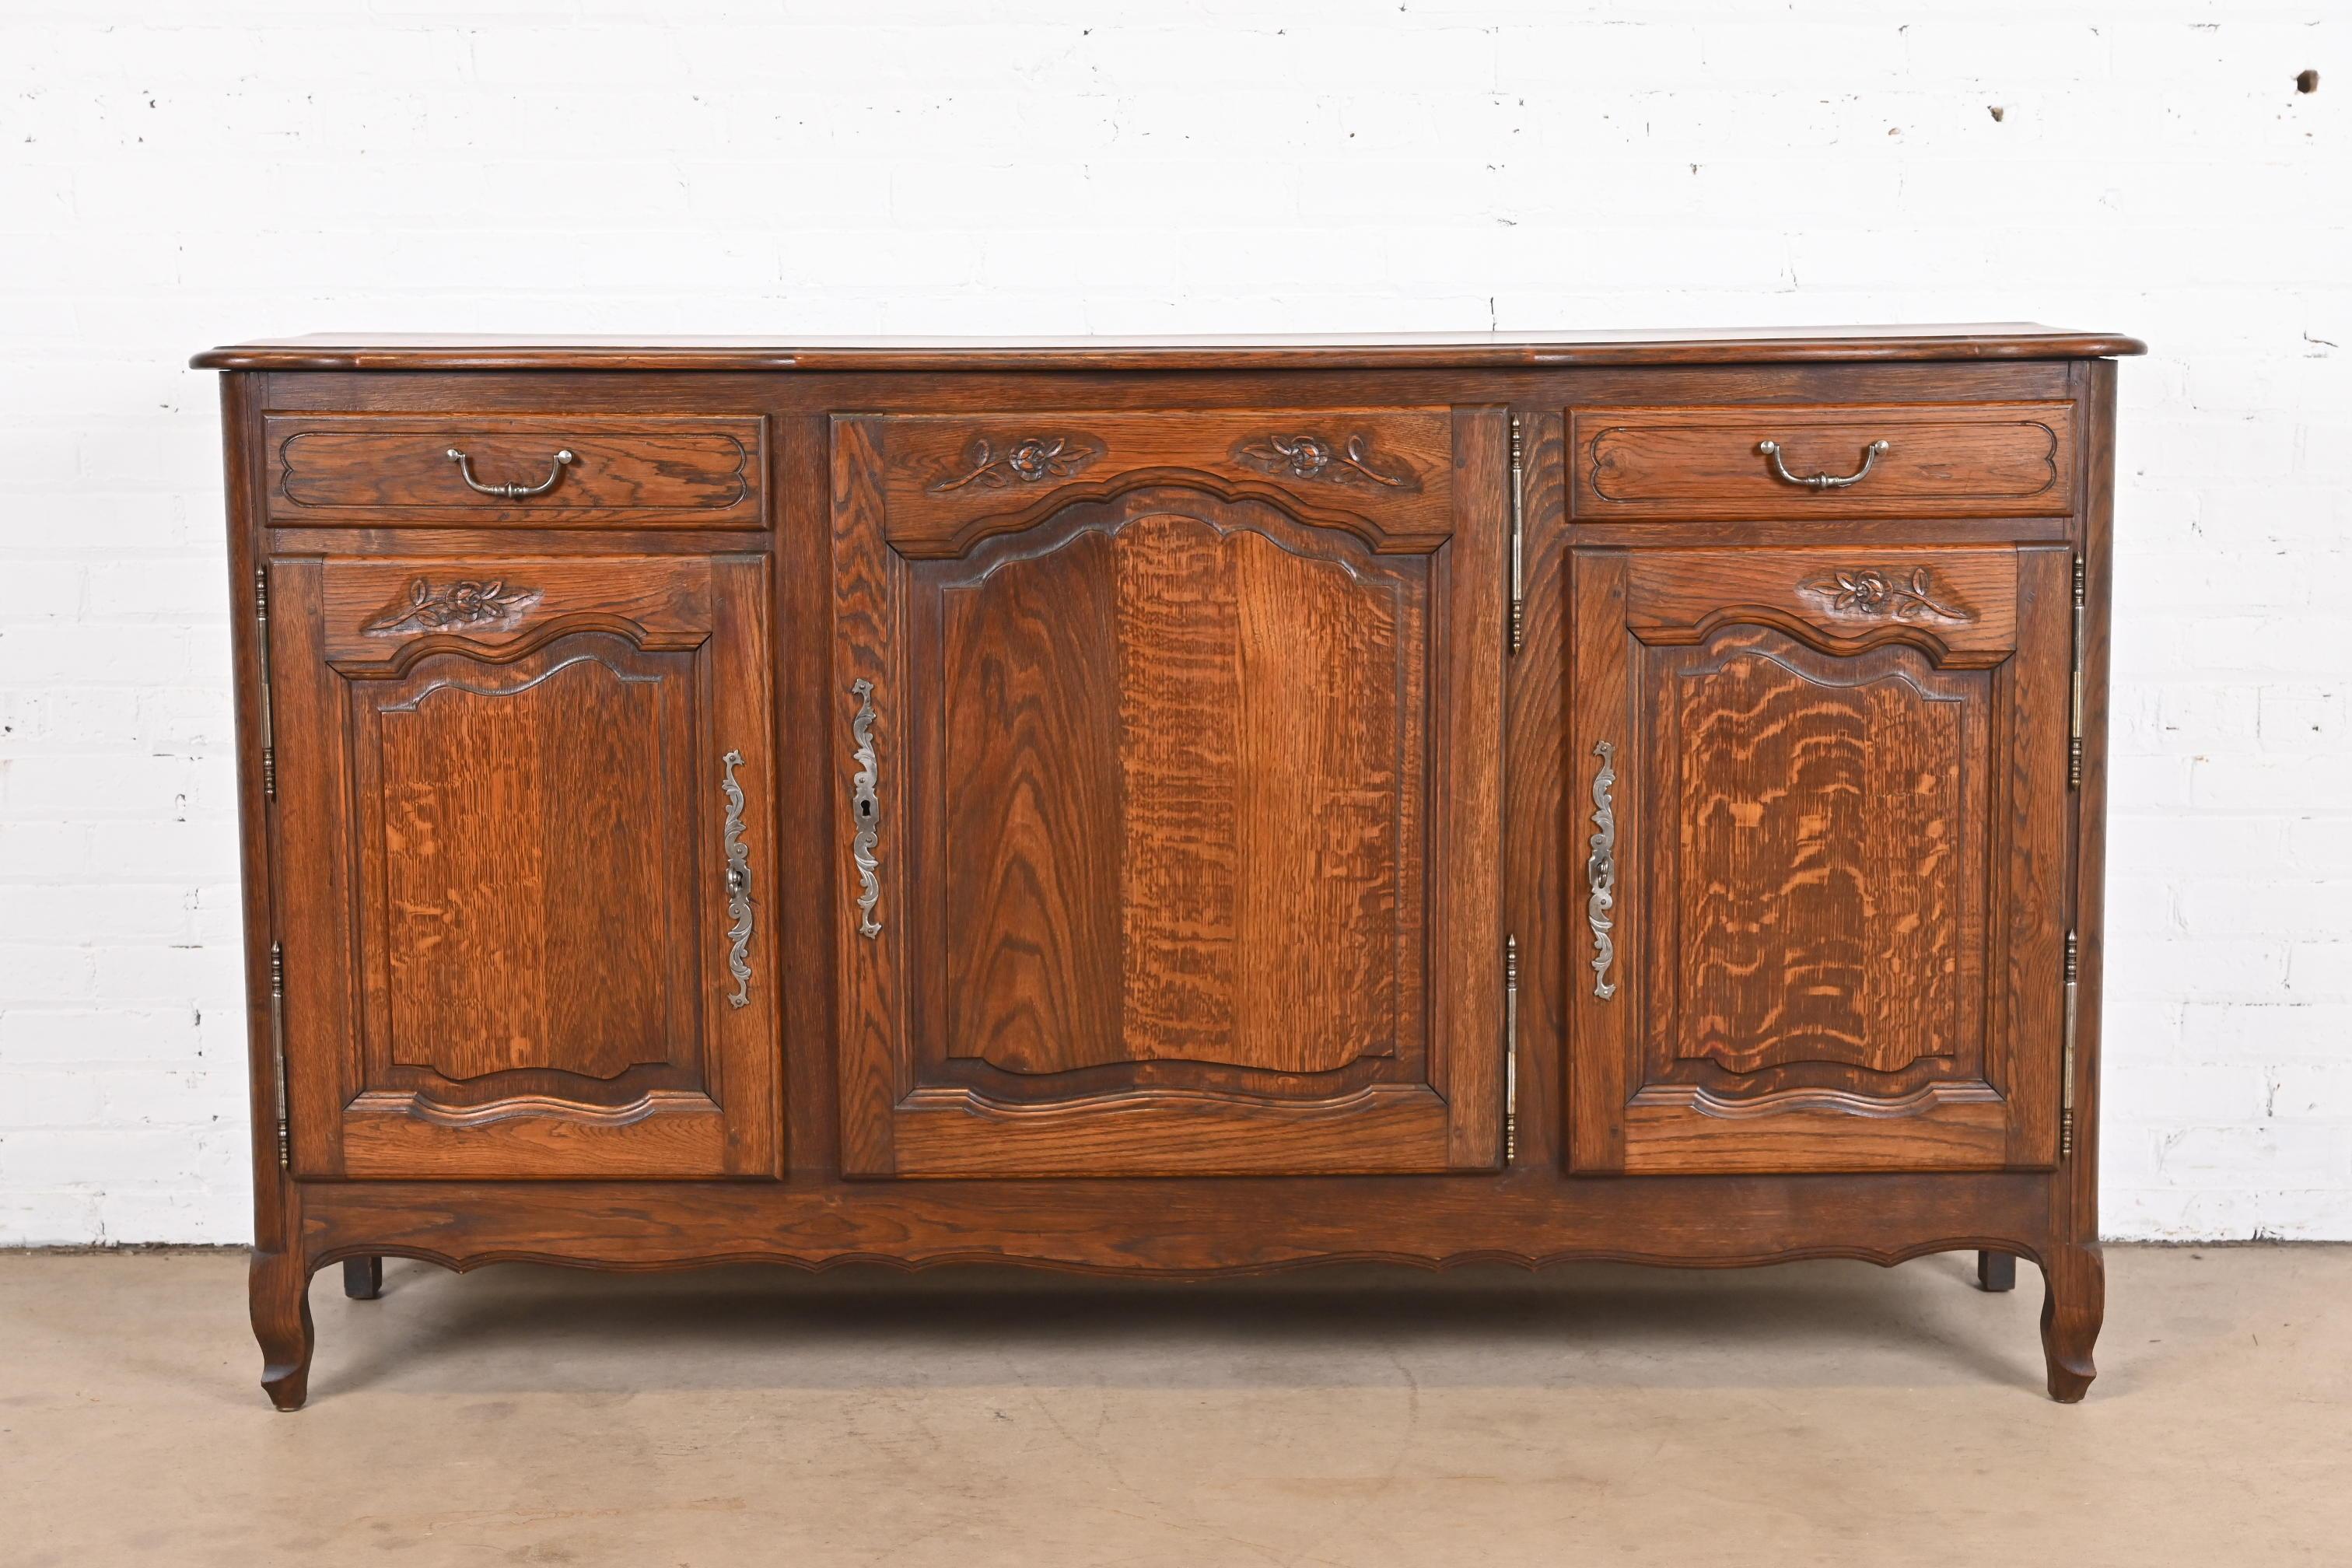 A gorgeous French Provincial Louis XV style sideboard, credenza, or bar cabinet

France, Early 20th Century

Carved oak, with original nickel hardware. Cabinets lock, and two keys are included.

Measures: 70.75